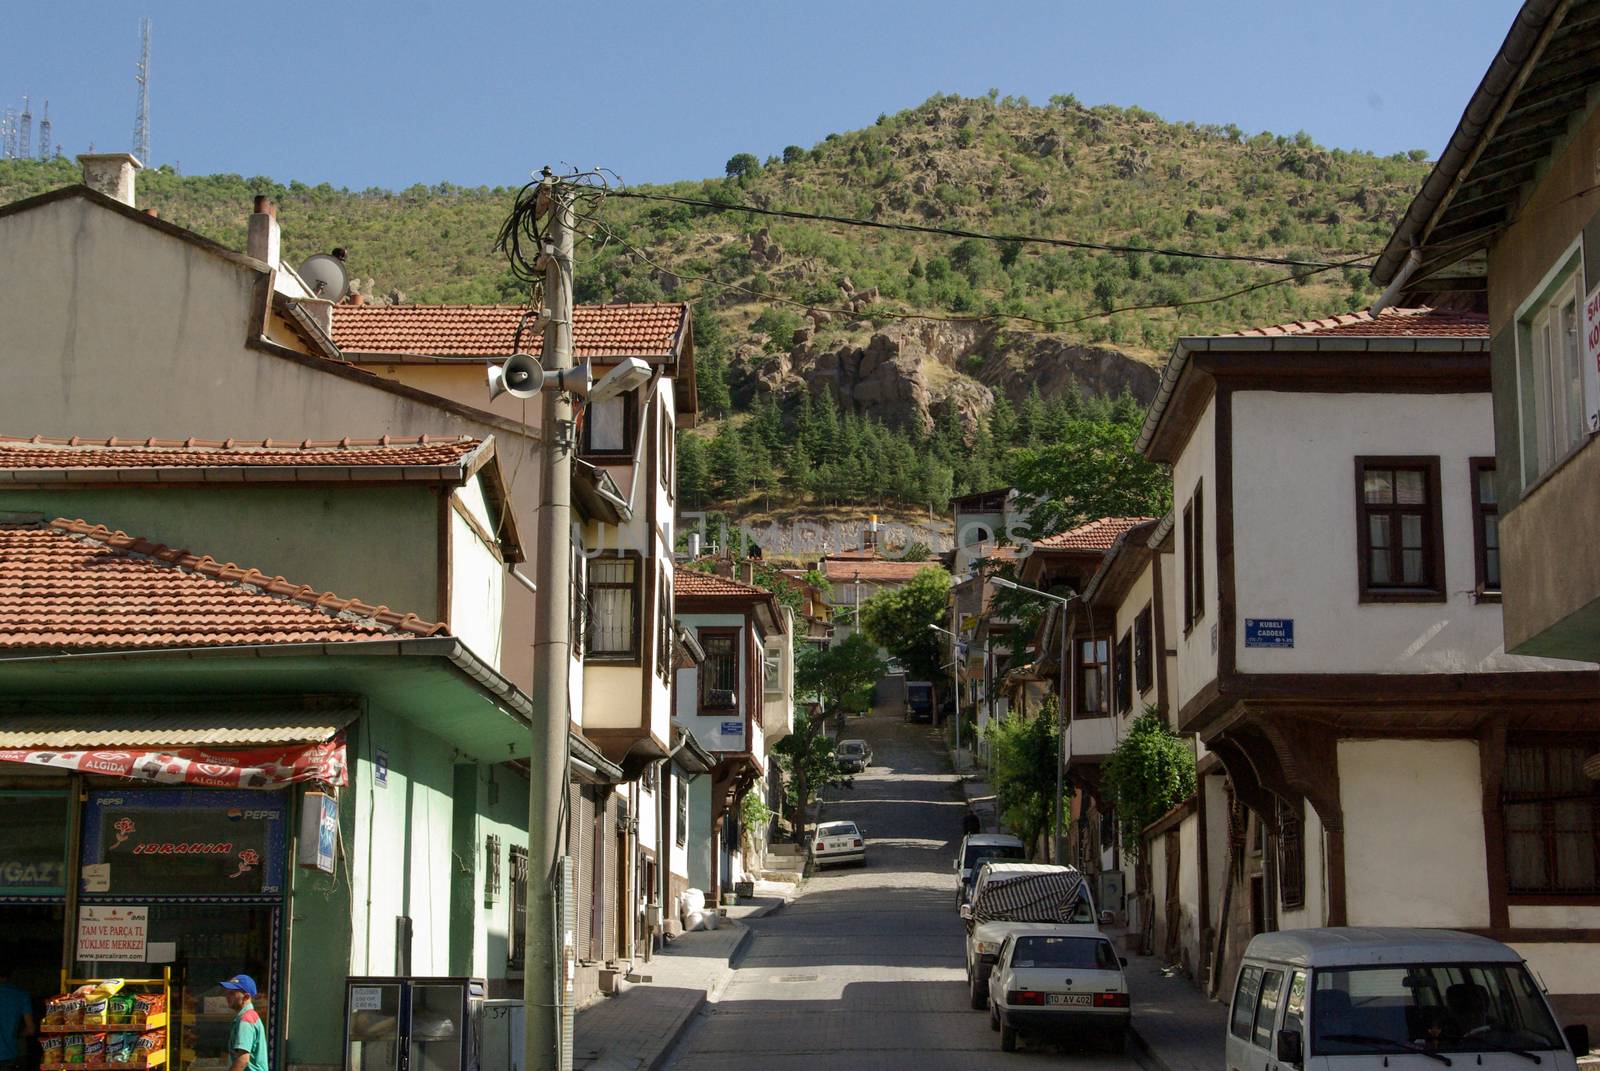 Old styled wooden Turkish houses in the street by berkay